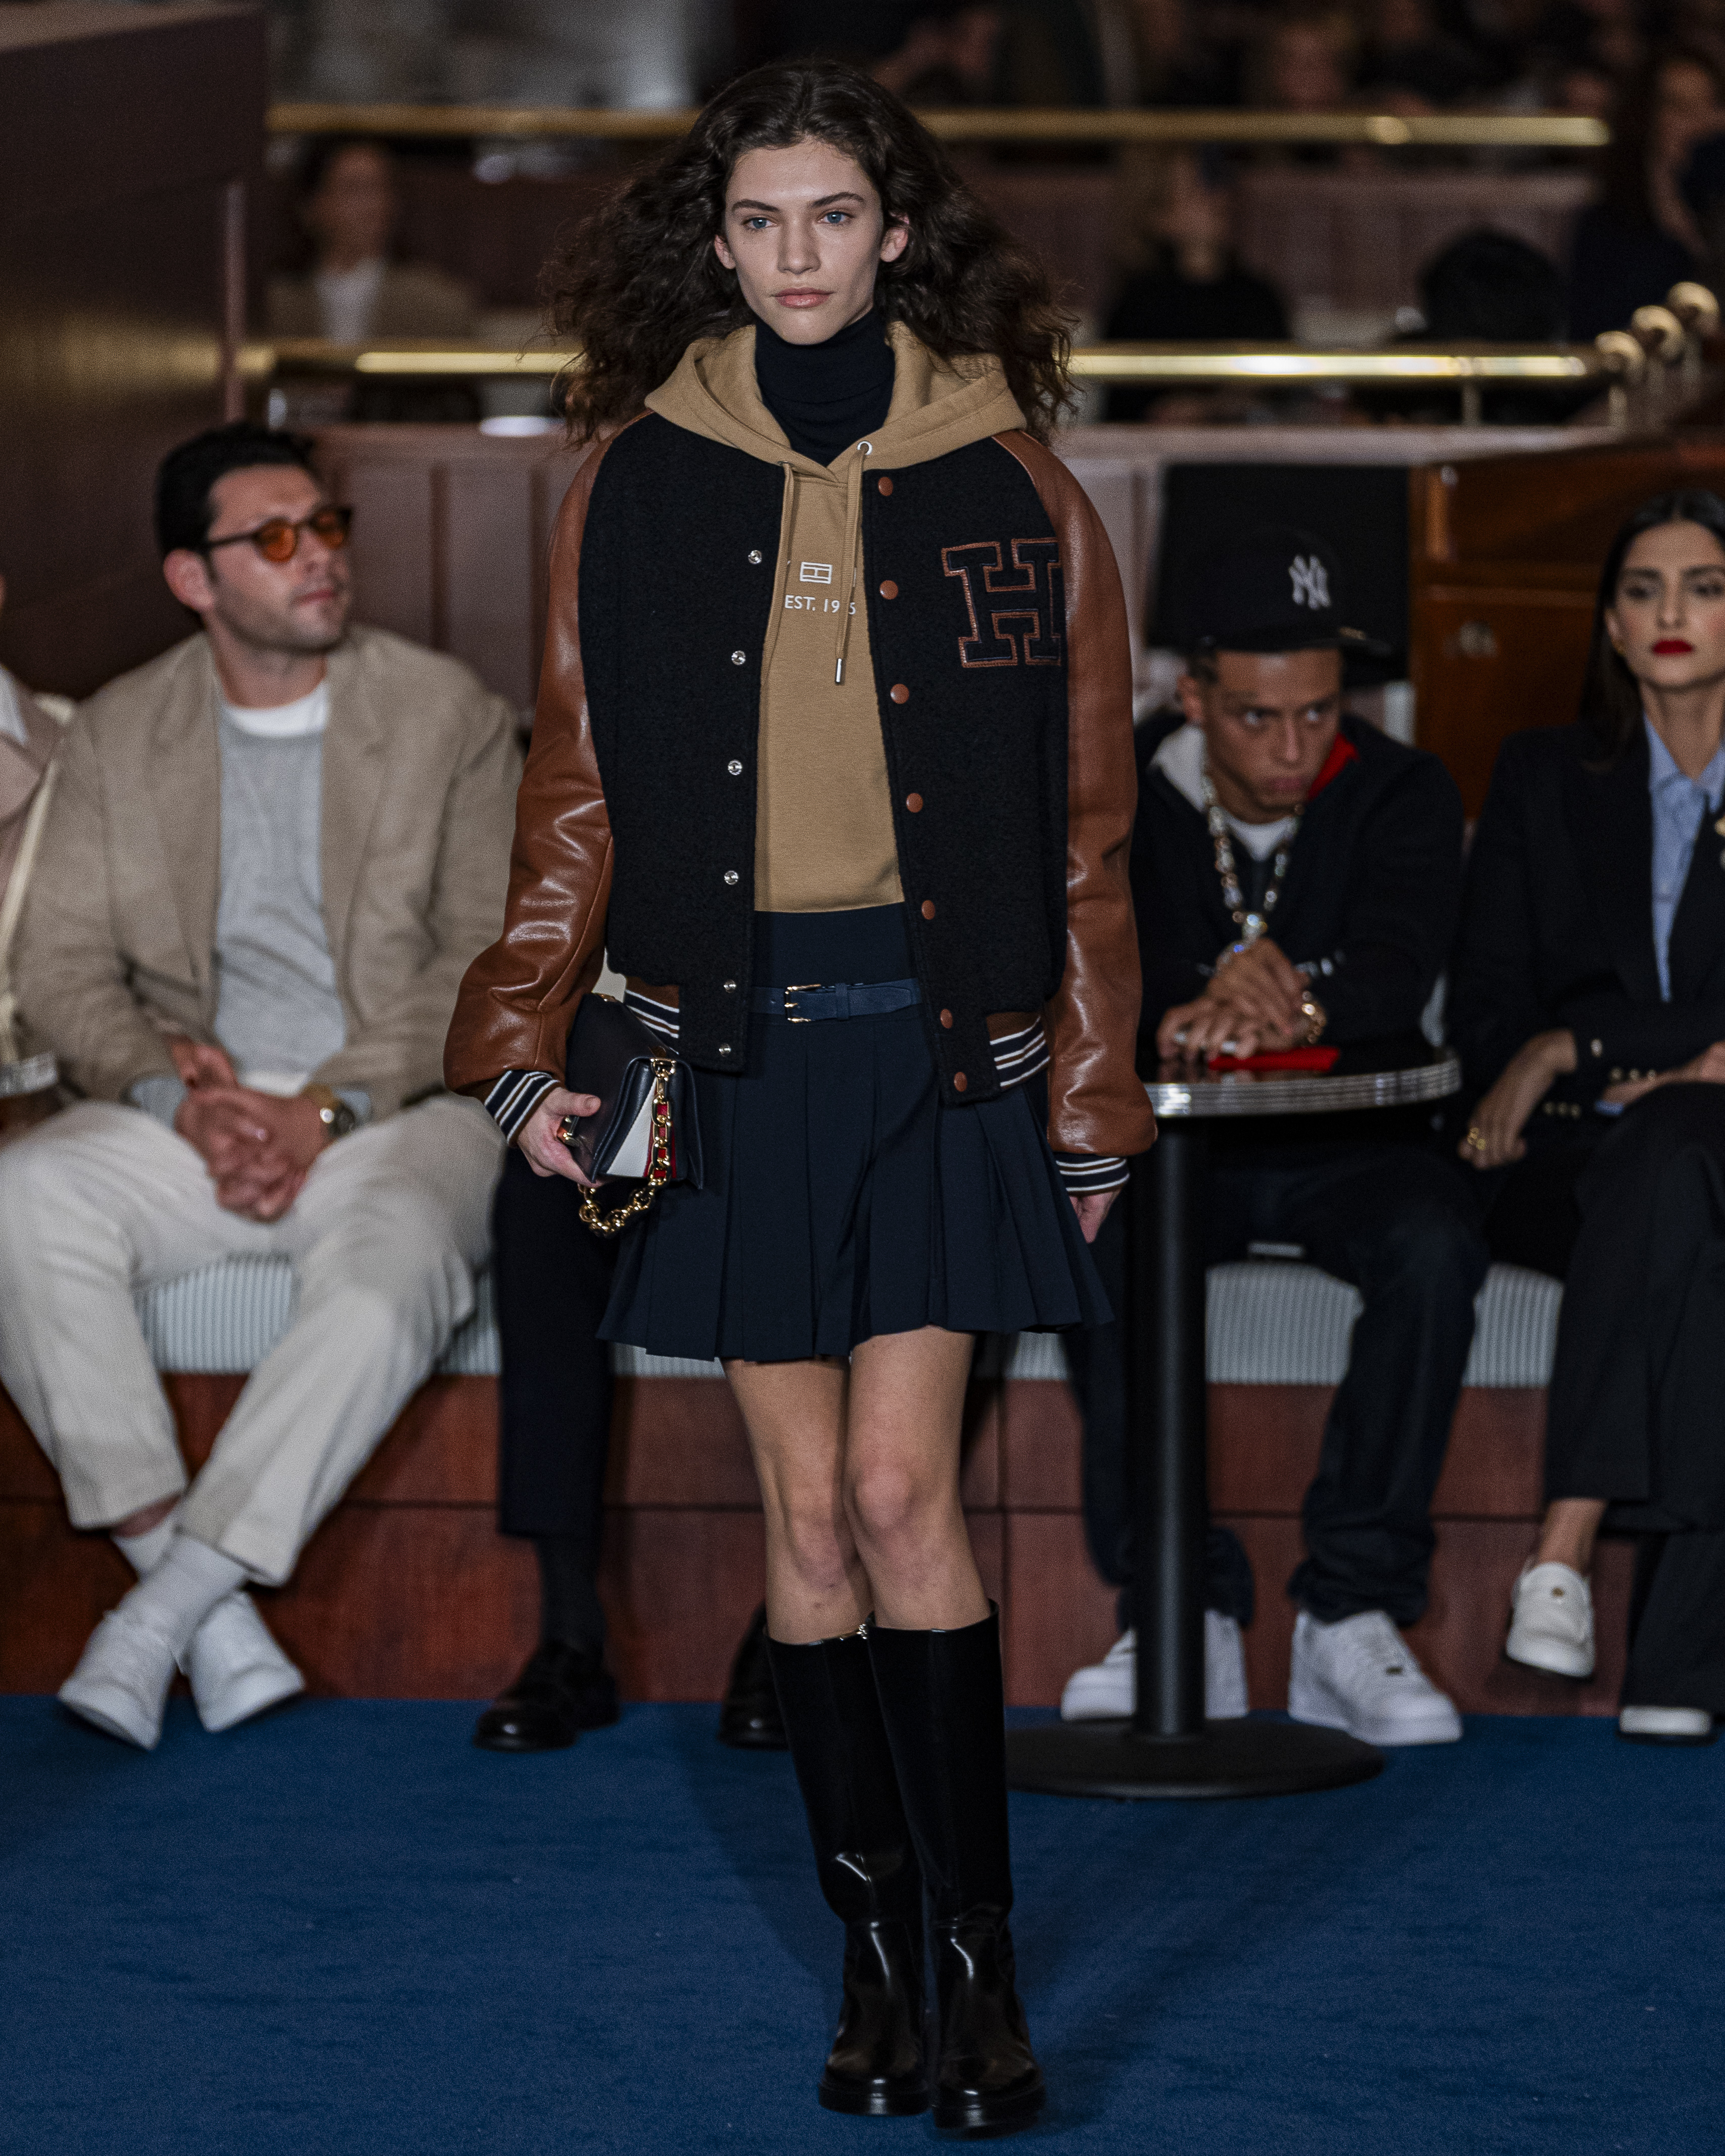 Tommy Hilfiger takes over the Oyster Bar in Grand Central for a